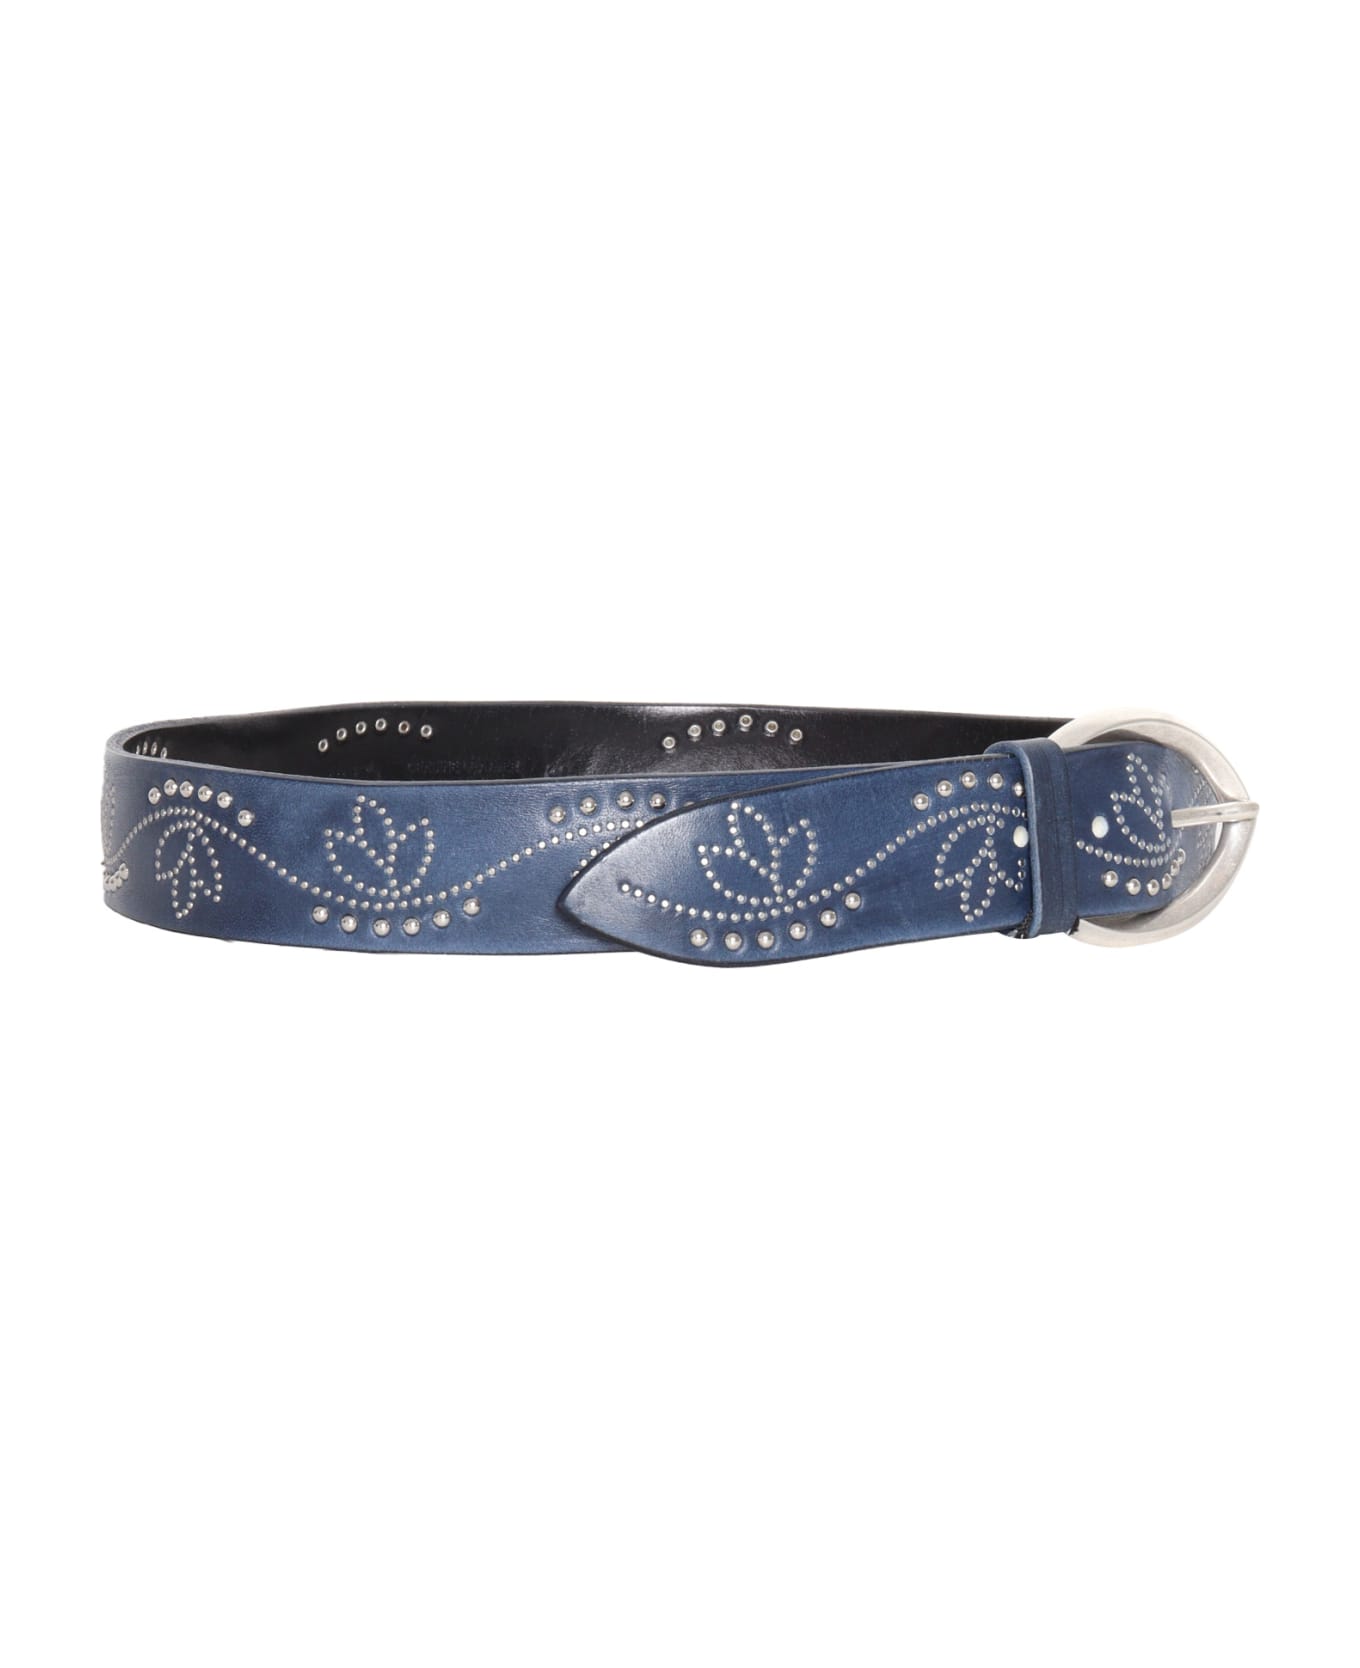 Orciani Leather Belt With Studs - BLUE